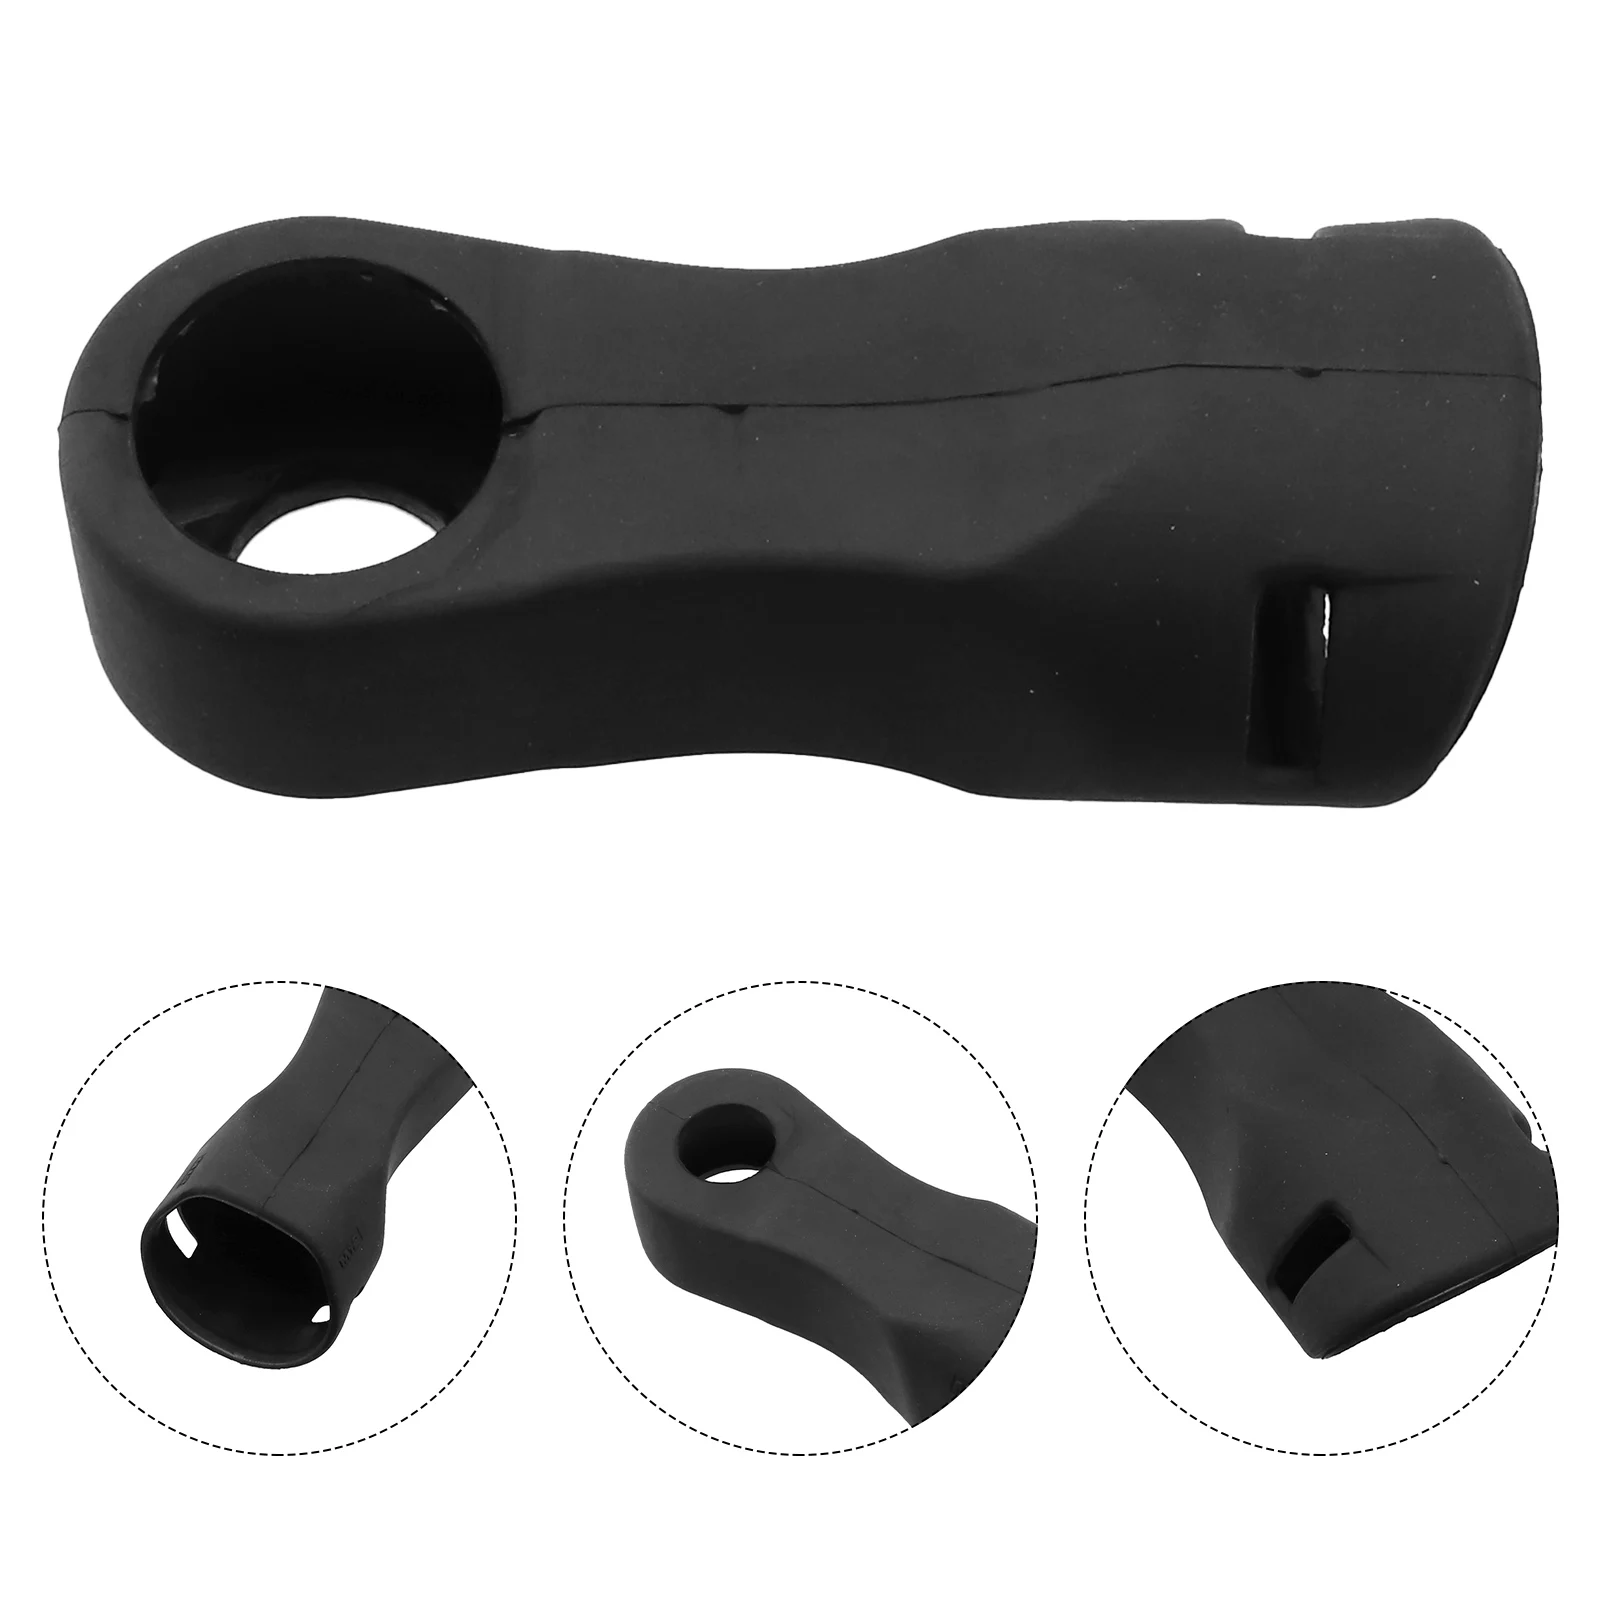 

New Arrival Ratchet Boot Protective Cover For FUEL 3/8 Inch High Speed Ratchet Case Replacemnet 49-16-2557